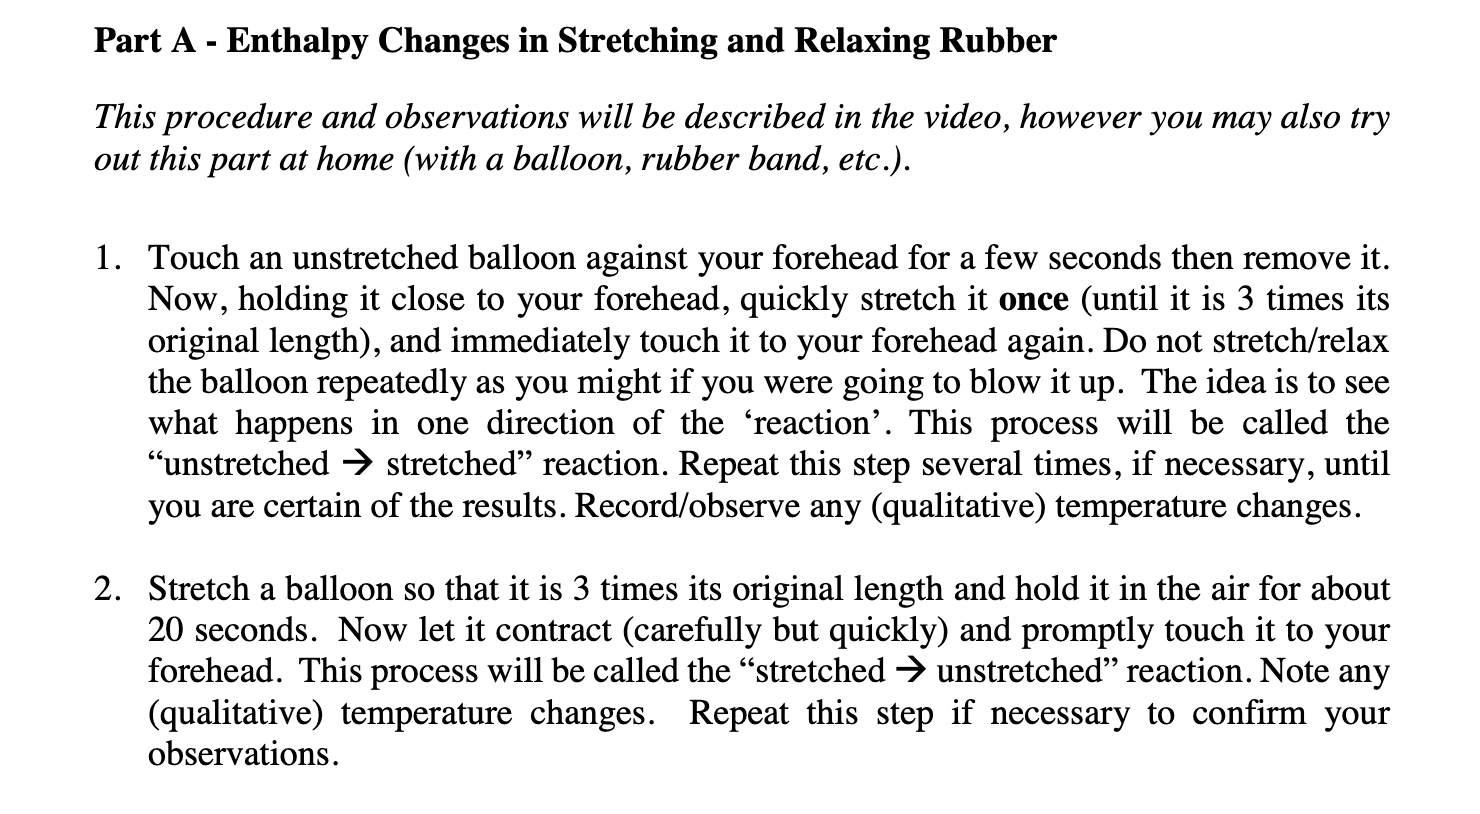 When You Release A Stetched Rubber Band, Why Does It Change